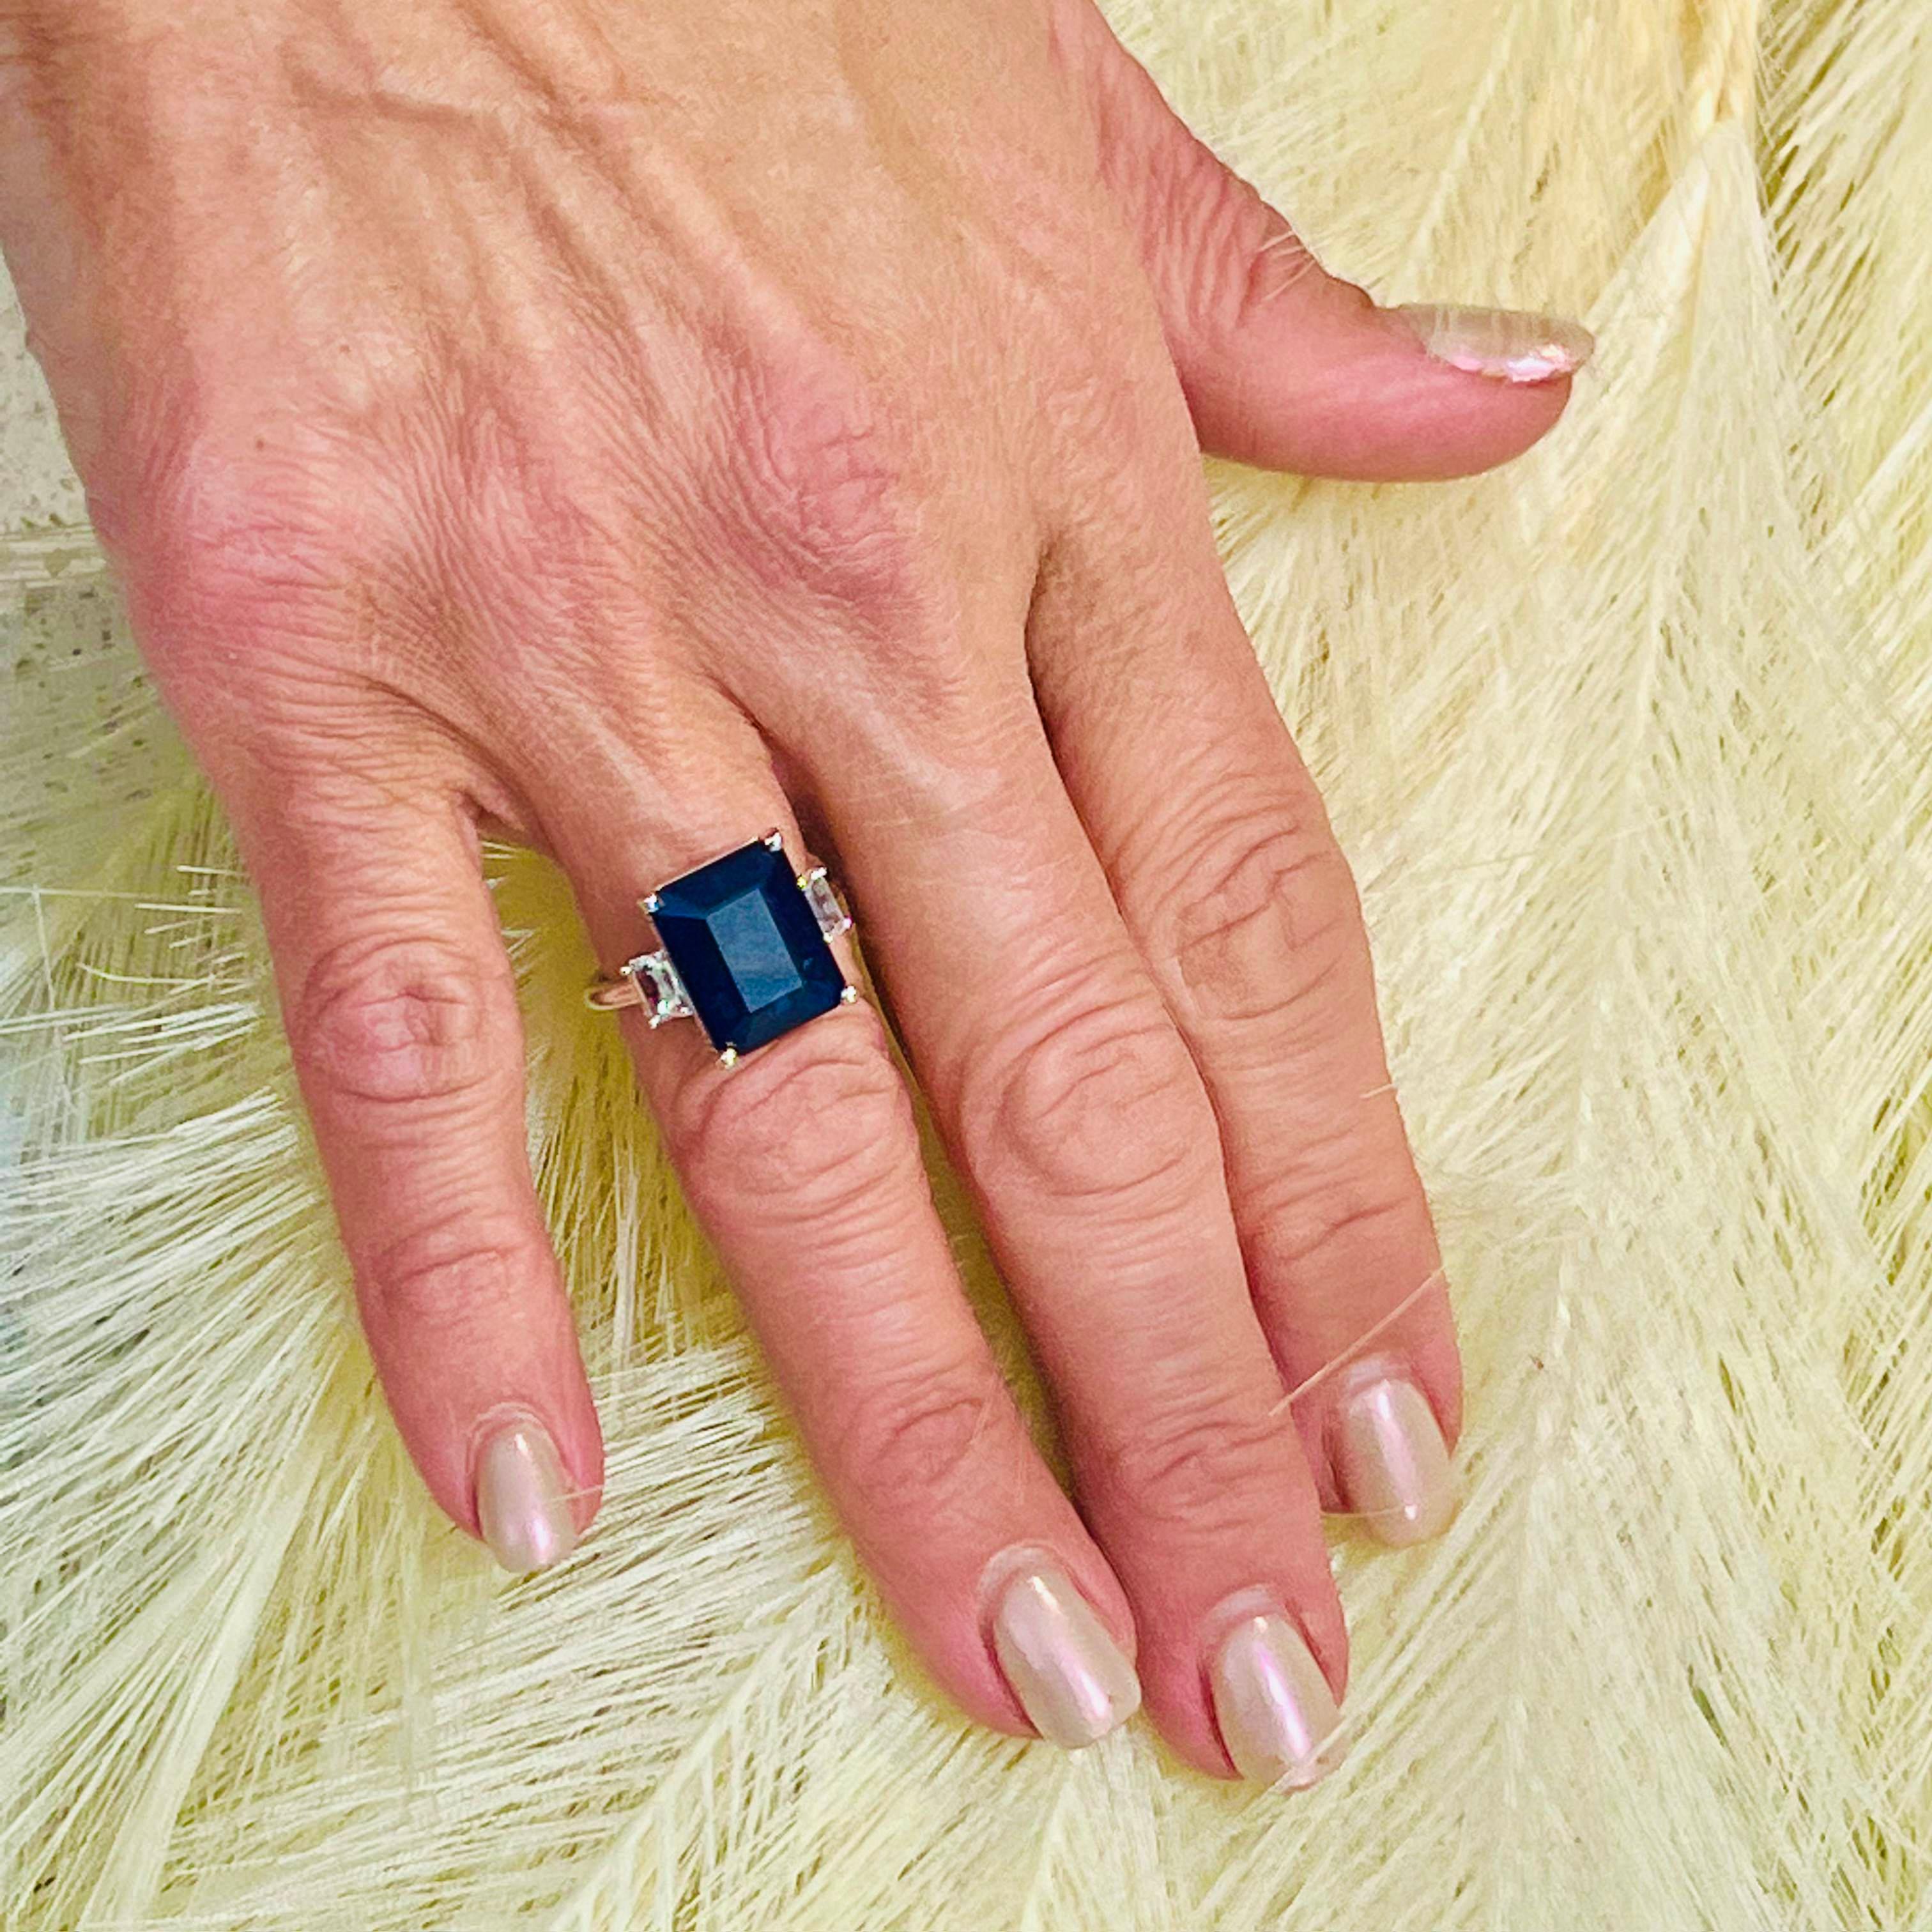 Natural Composite Sapphire Diamond Ring Size 7 14k W Gold 12.36 TCW Certified $3,475 219222

Nothing says, “I Love you” more than Diamonds and Pearls!

This Sapphire ring has been Certified, Inspected, and Appraised by Gemological Appraisal